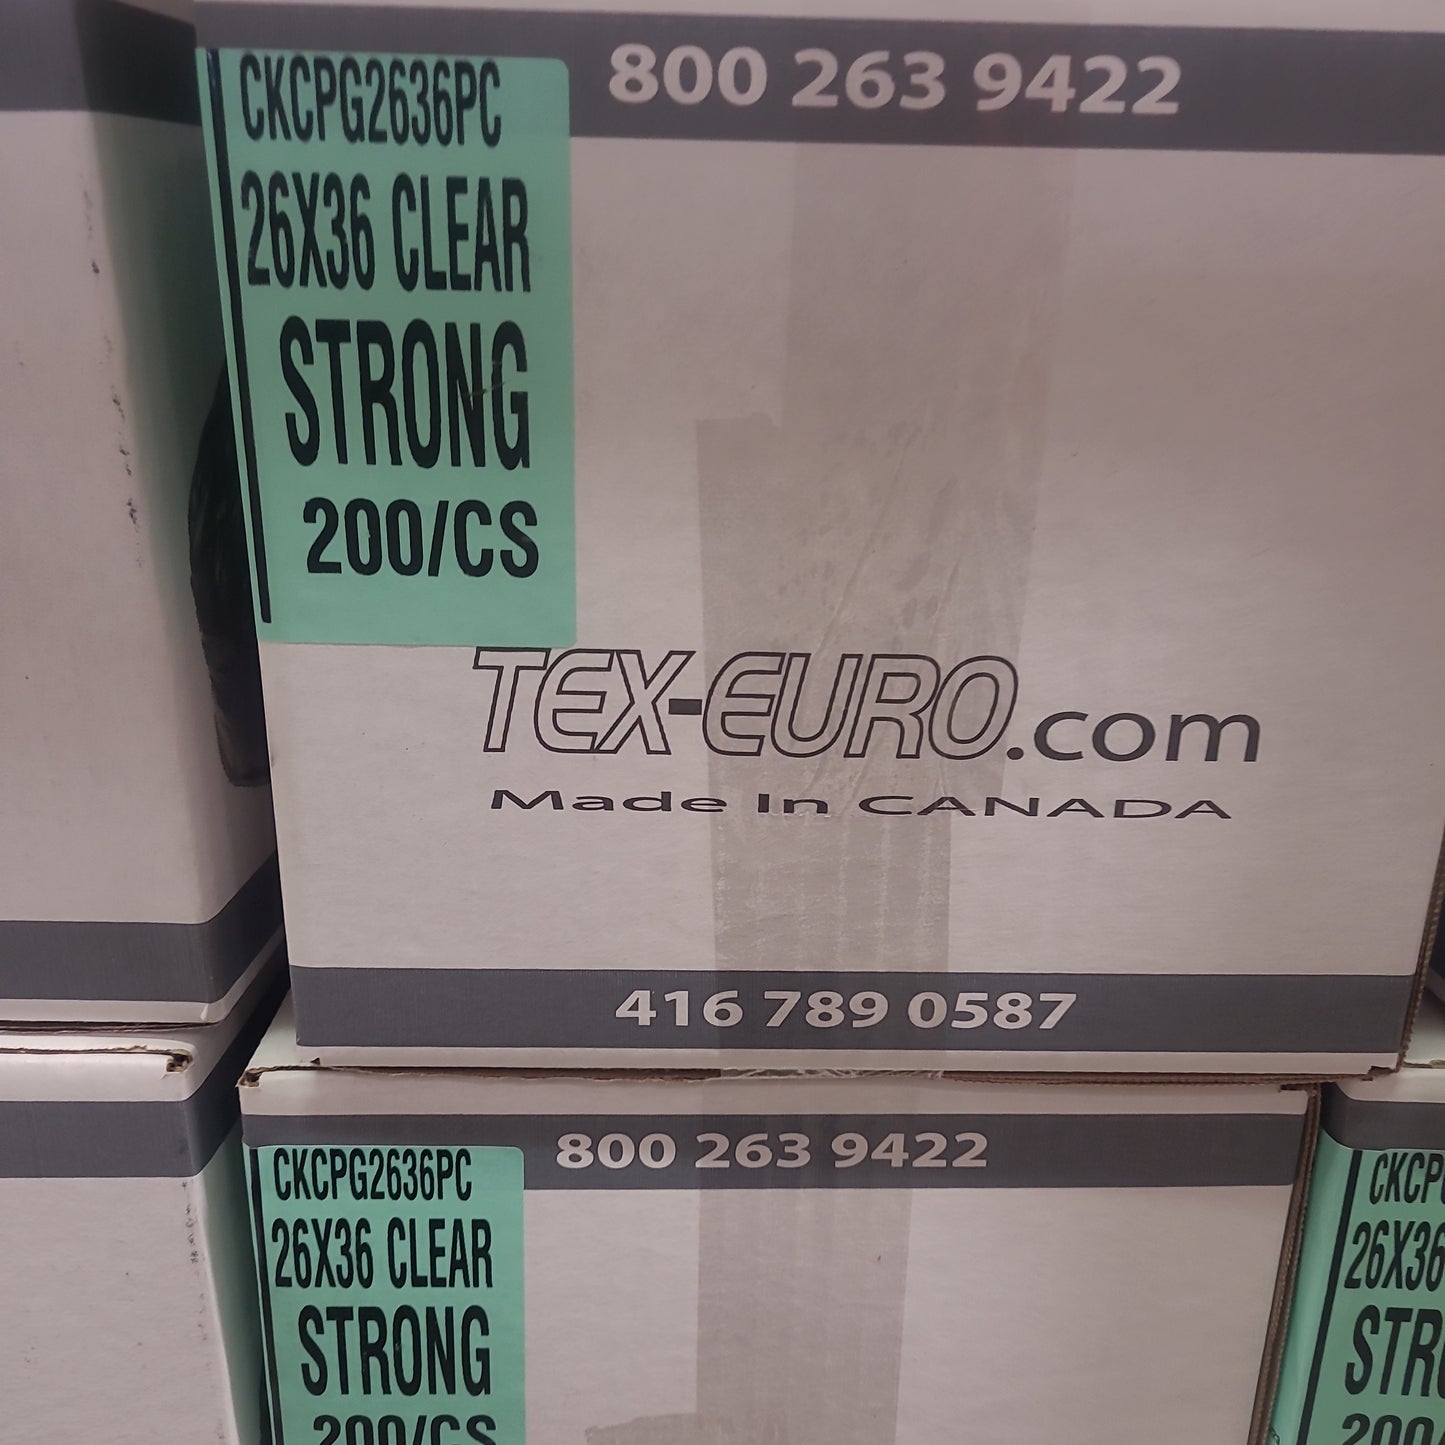 26X36 STRONG CLEAR GARBAGE BAGS (200)